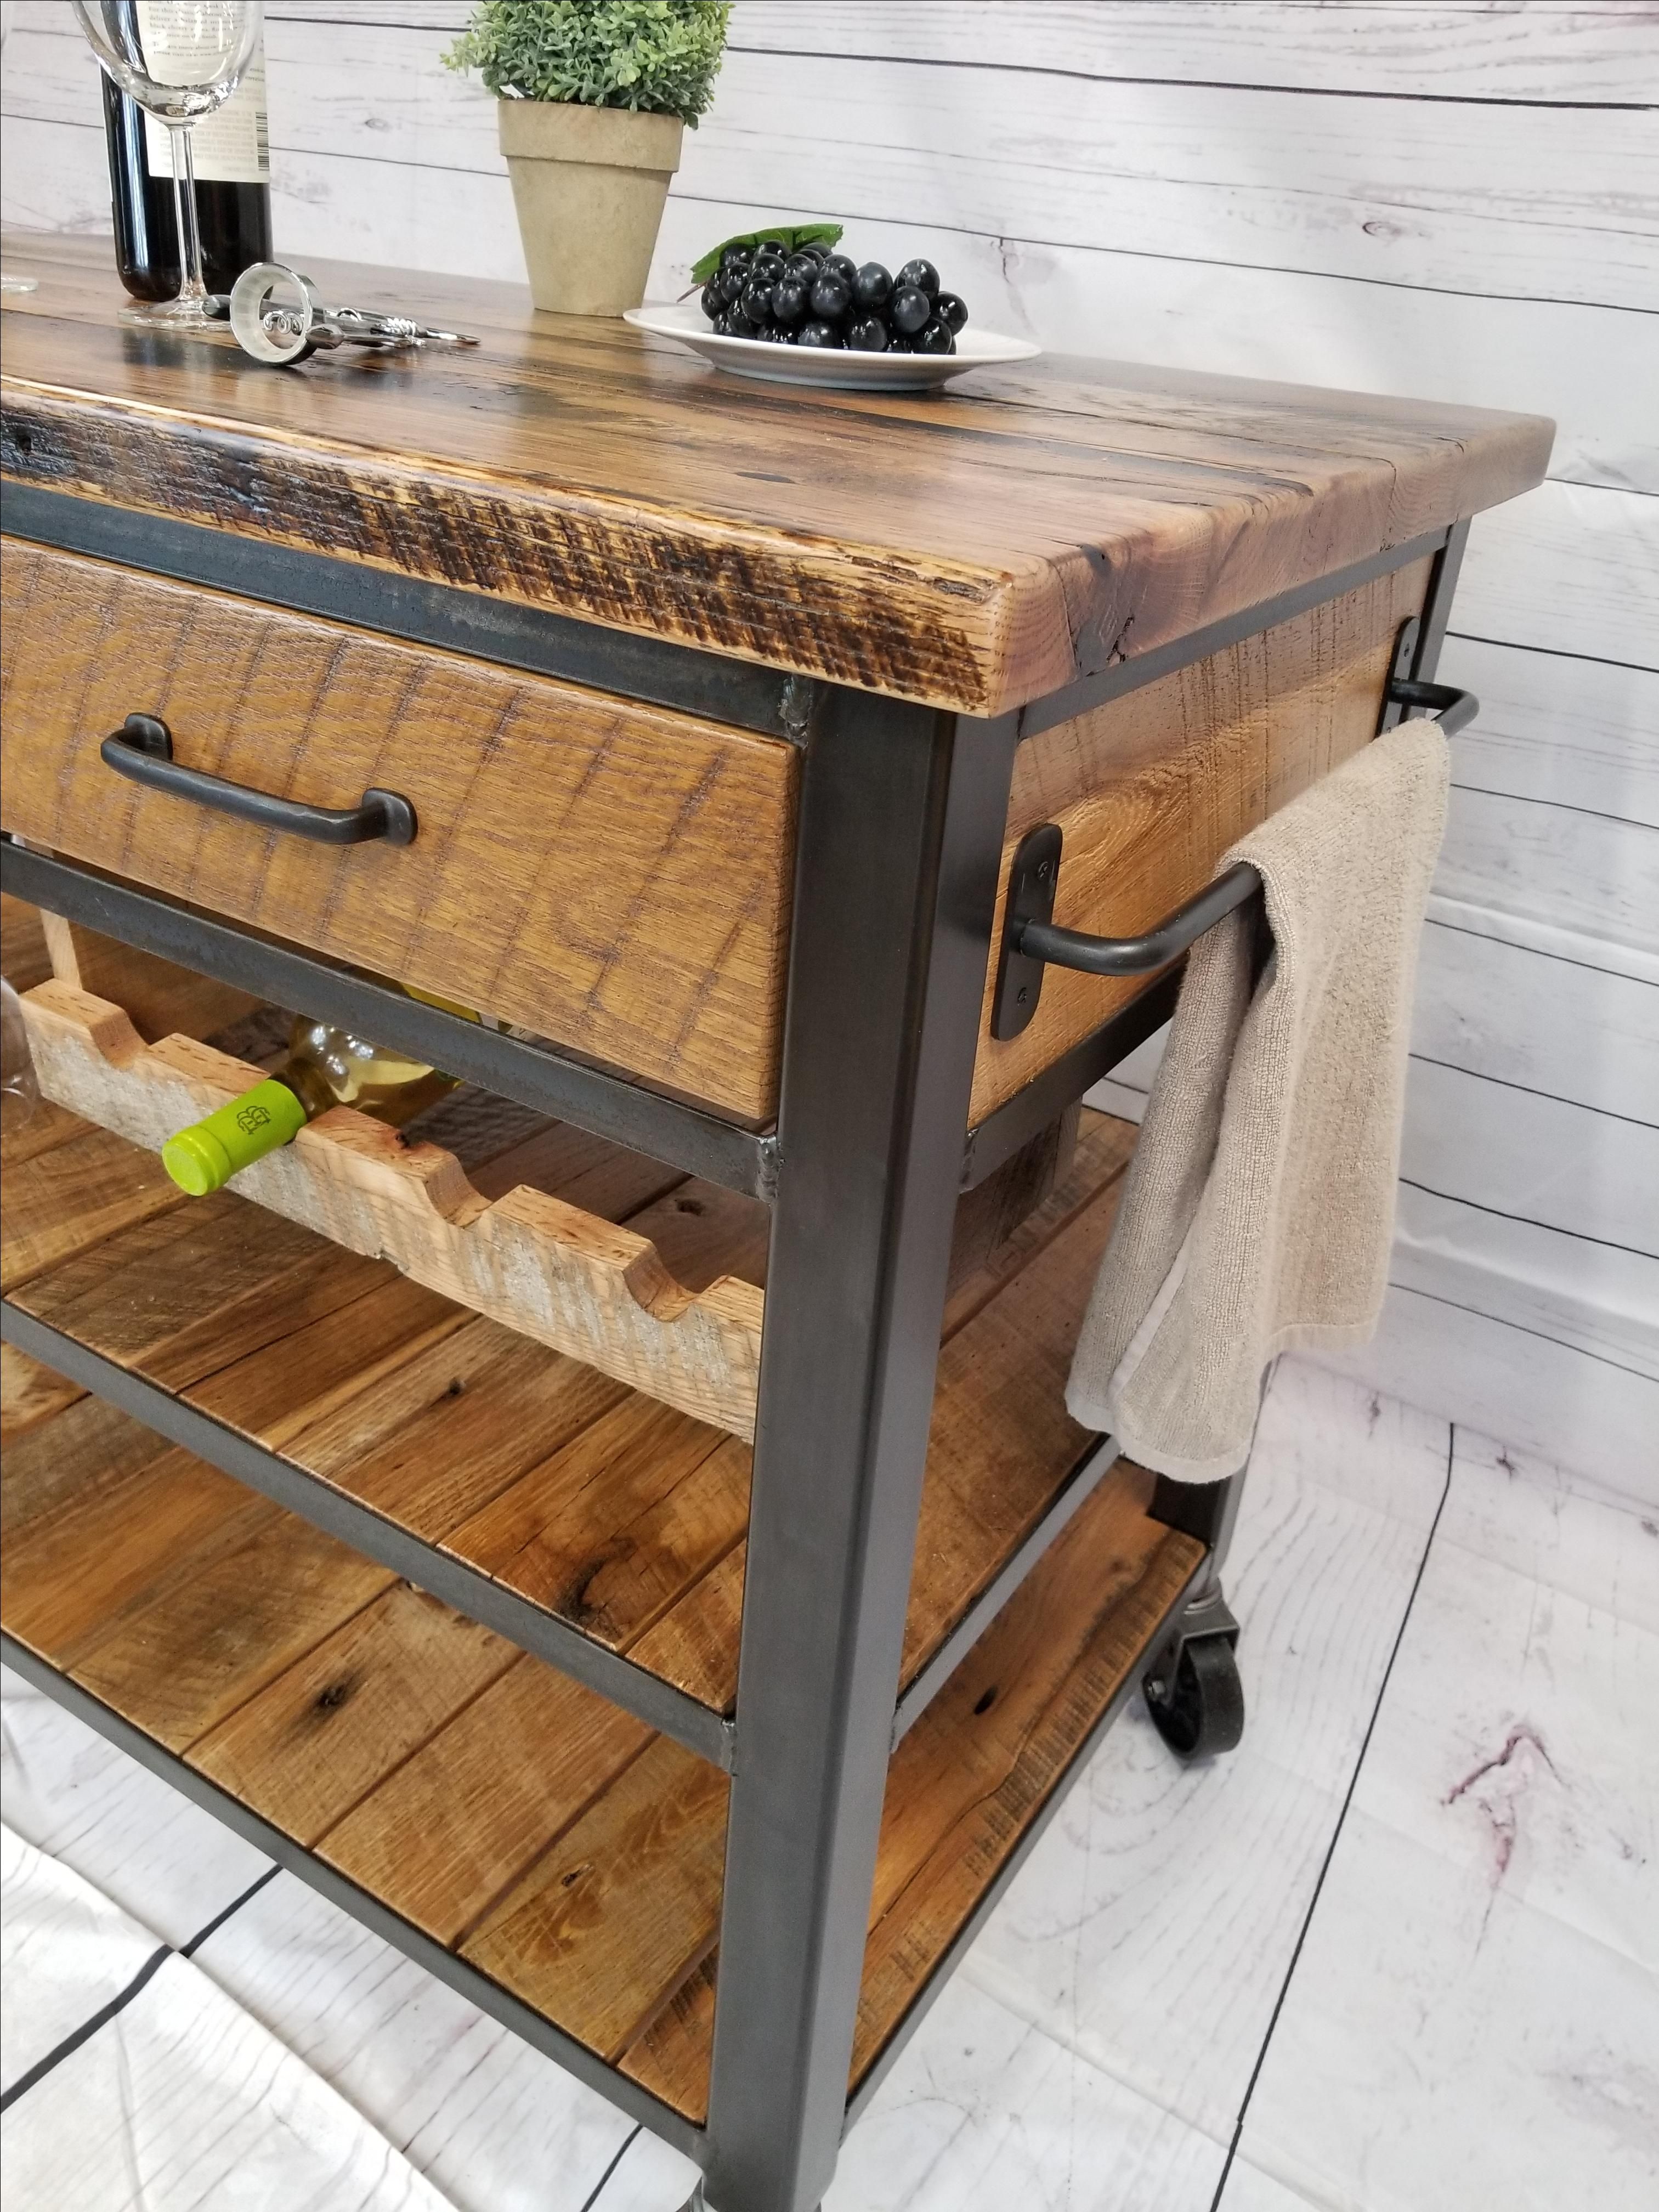 Buy Hand Made Reclaimed Wood Bar Cart, Rustic Kitchen Island, Beverage